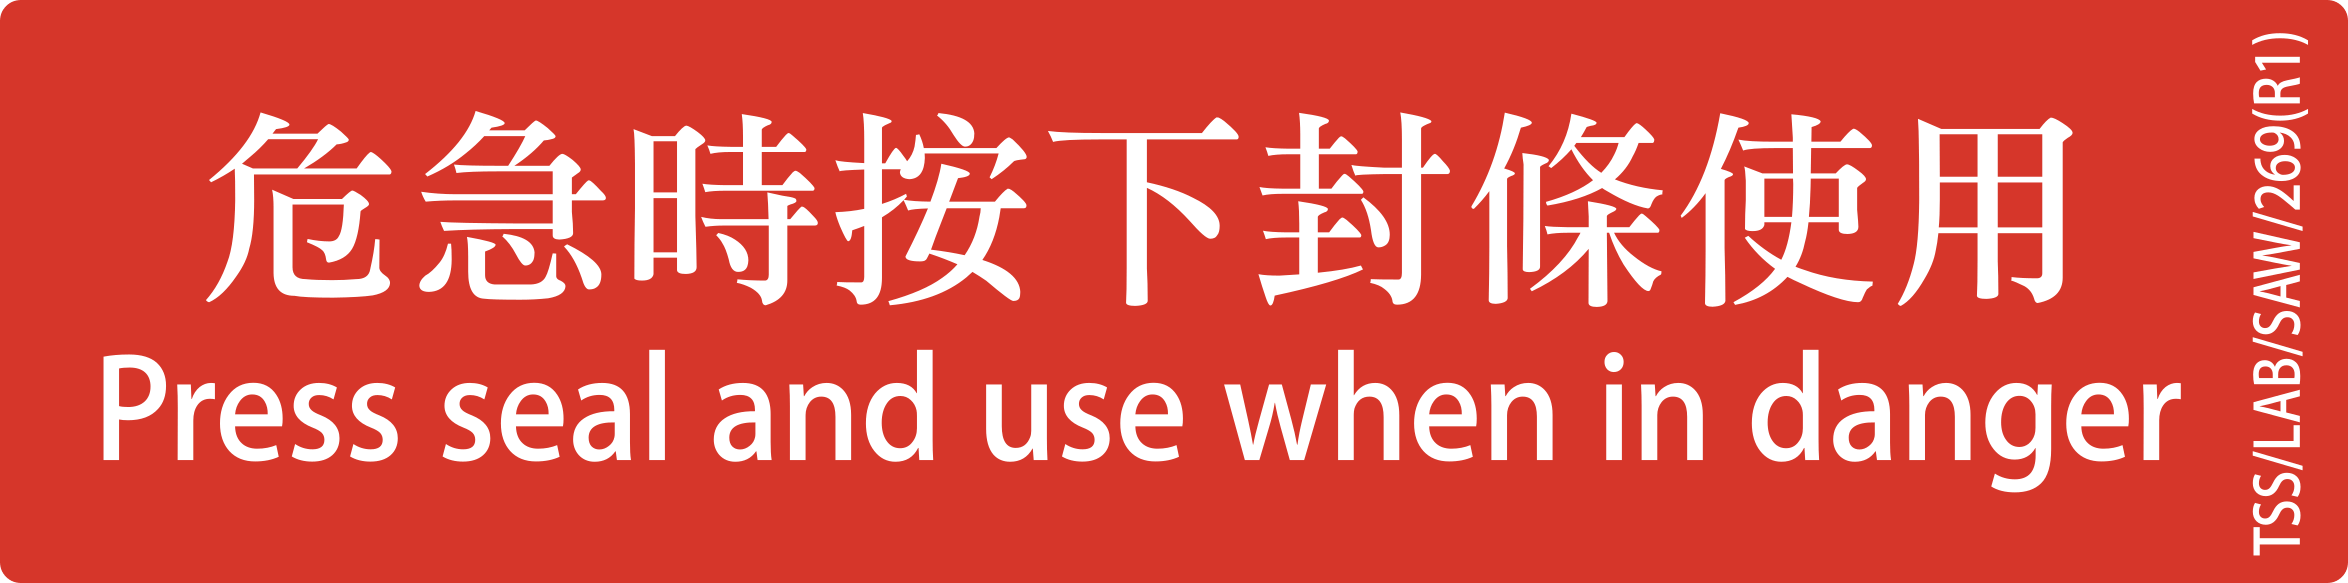 MTR sticker with red background: Press seal and use when in danger